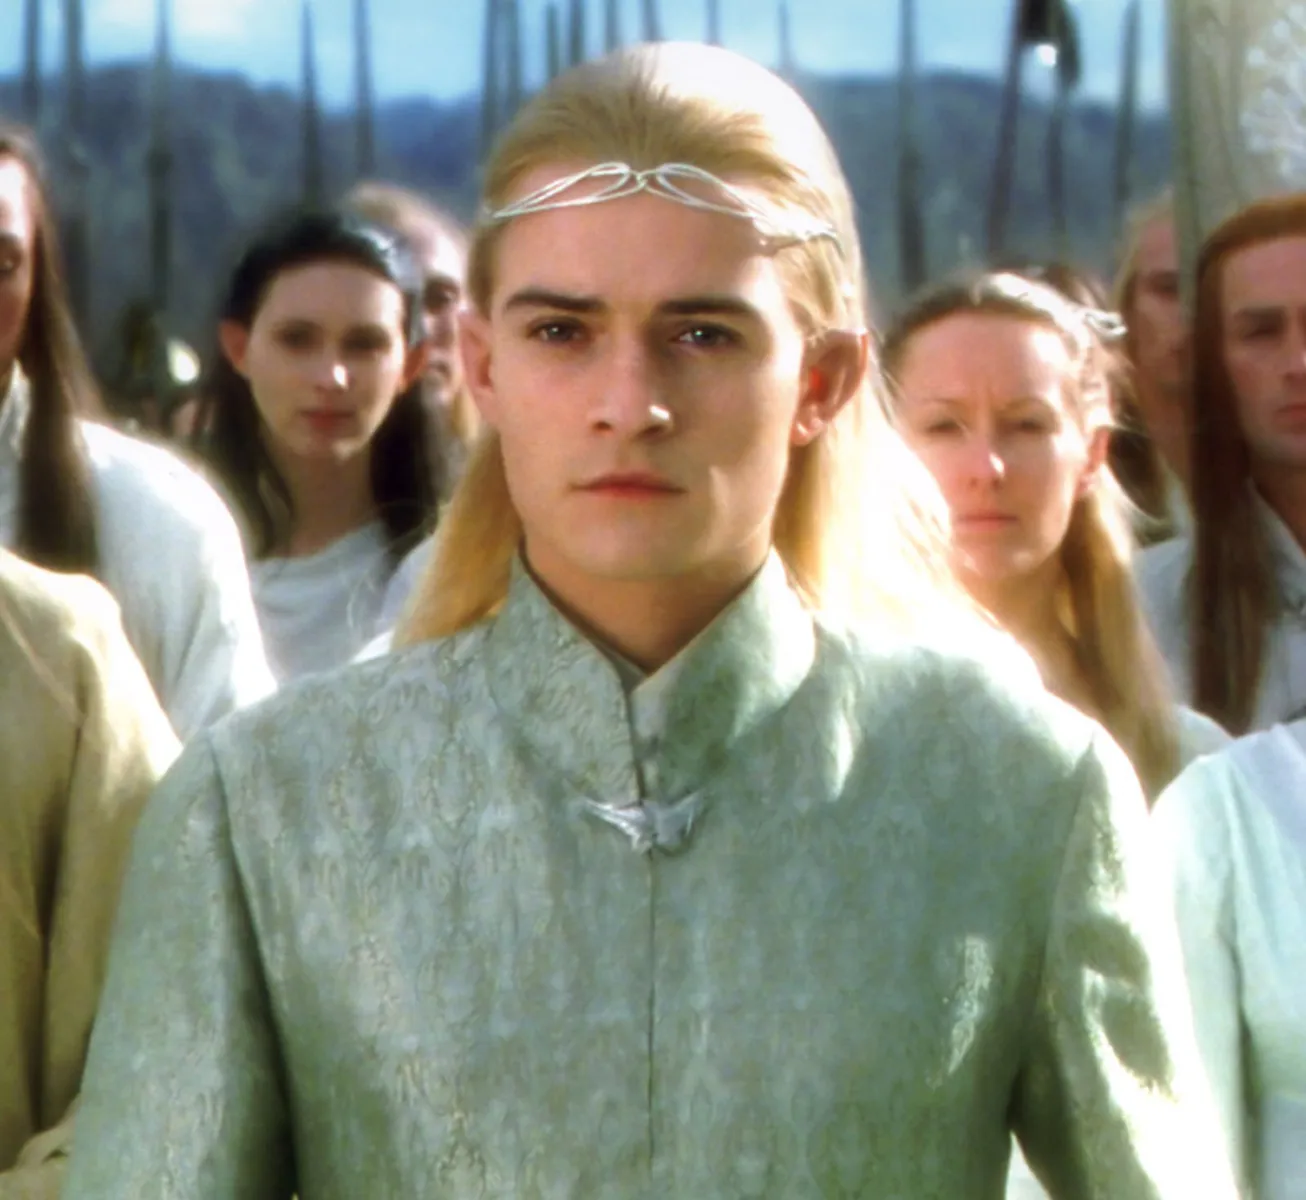 Recall the elves from the movie "The Lord of the Rings" and "The Hobbit" series | FMV6